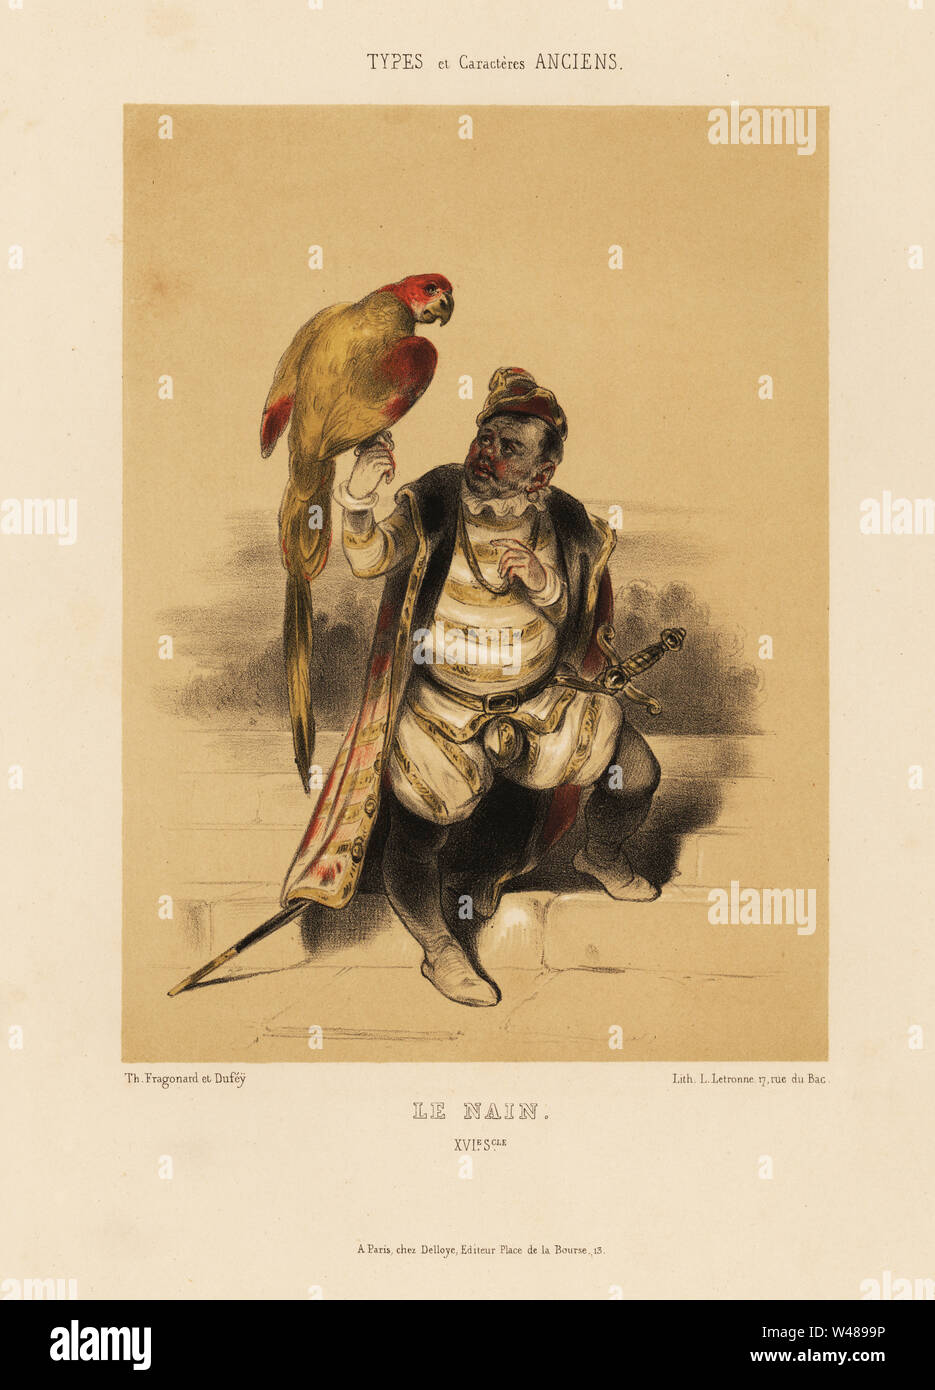 Midget with parrot, le Nain, 16th century. Court performer in hat, striped doublet, cape and codpiece, with sword and large exotic bird. Chromolithograph by Louis Rene Letronne after an illustration by Th. Fragonard et Dufey from Le Keepsake Francais with 12 plates from A. Mazuy’s Types et Caracteres Anciens, d’apres des Documents Peints ou Ecrits, chez Delloye, Paris, 1841. Stock Photo